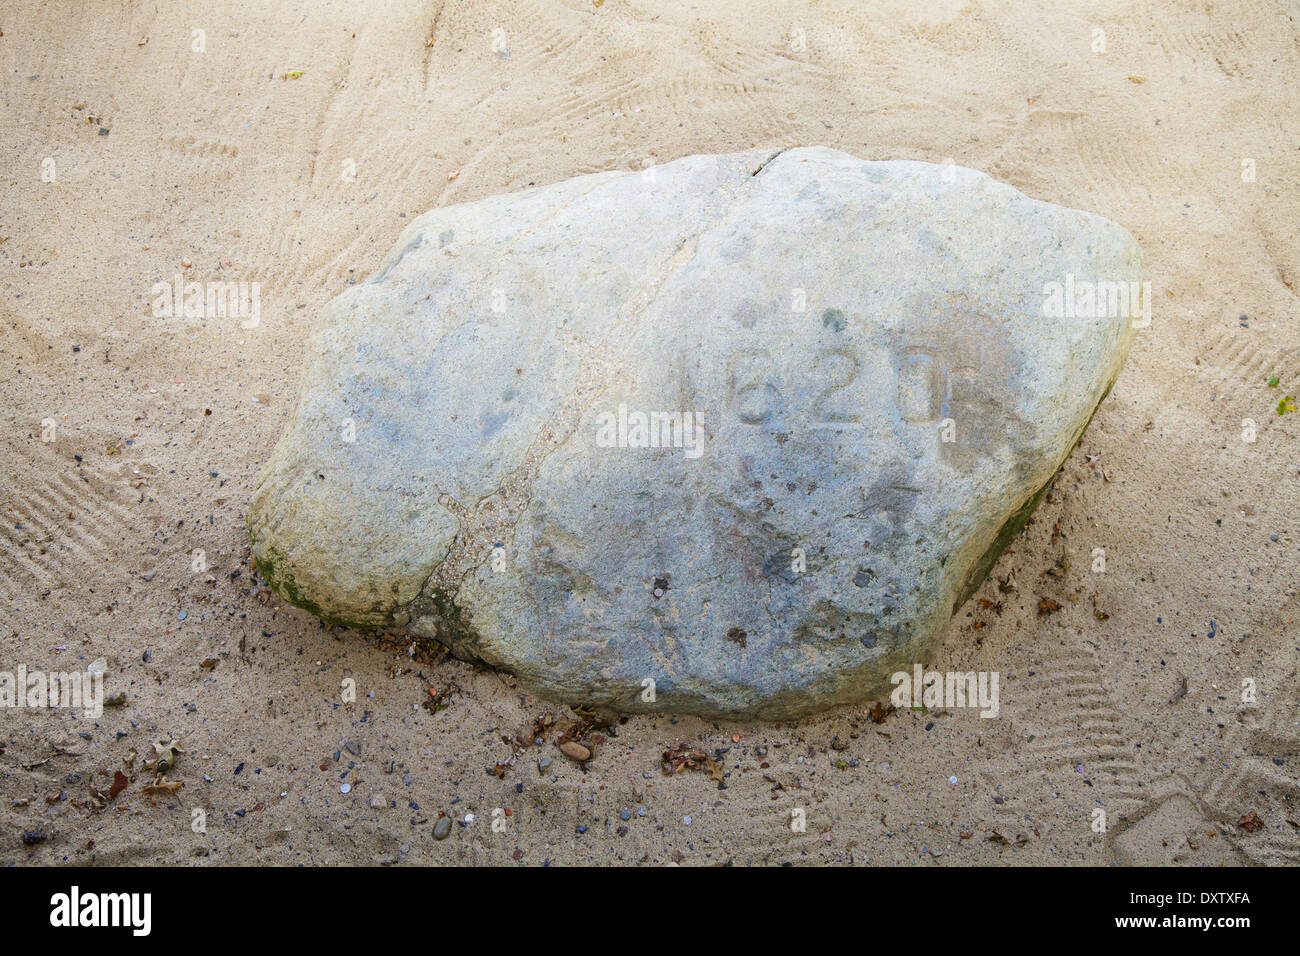 Plymouth Rock, site of the Mayflower landing; Plymouth, Massachusetts, United States of America Stock Photo